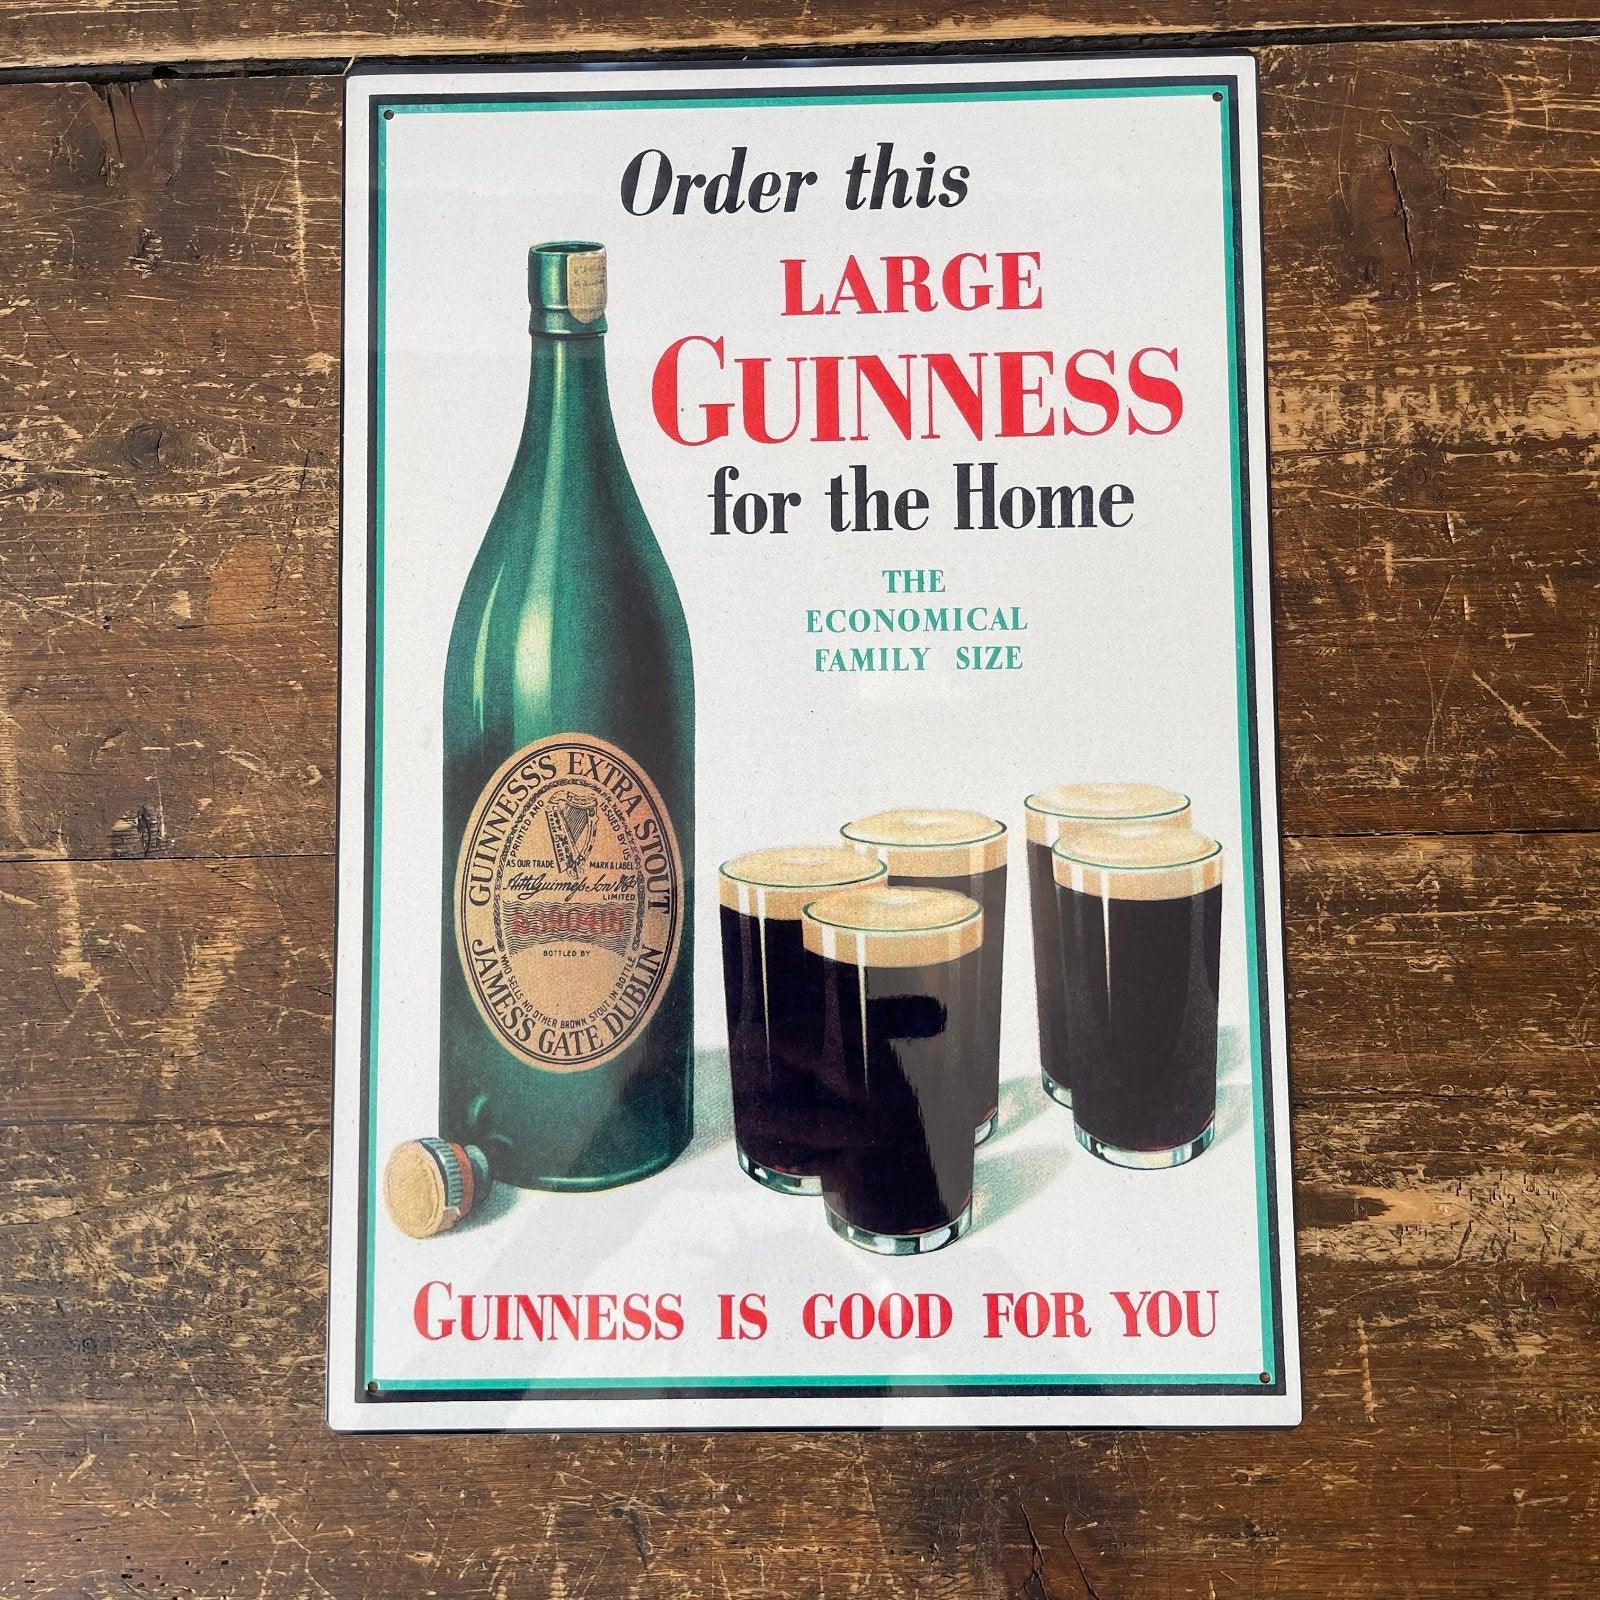 View Vintage Metal Sign Retro Advertising Large Guinness For Home information